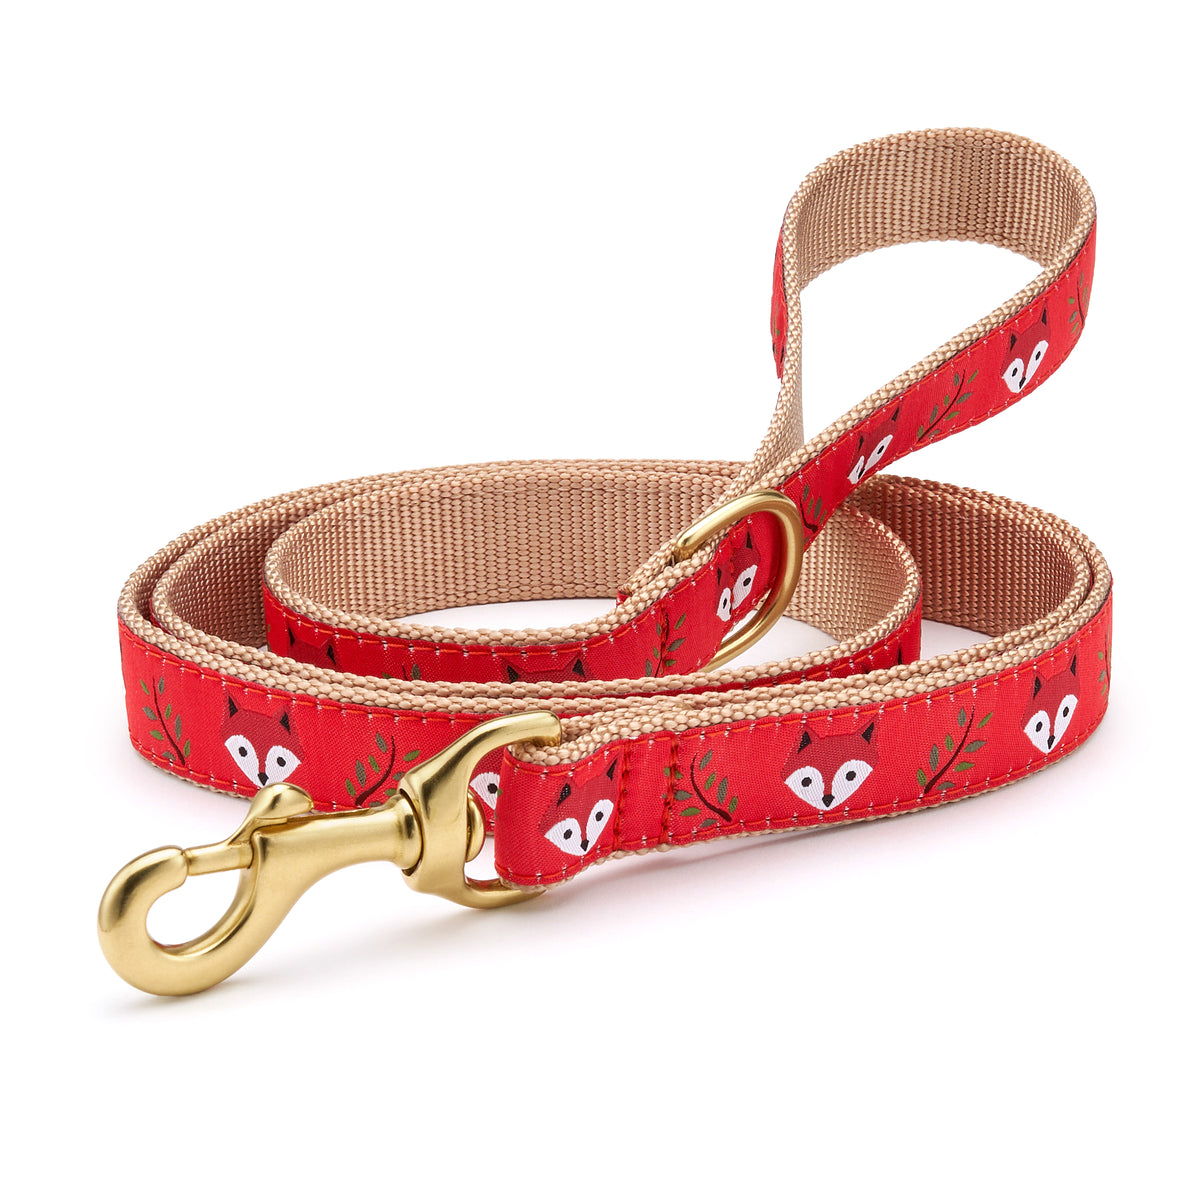 Louis Vuitton Dog Harness and Leash